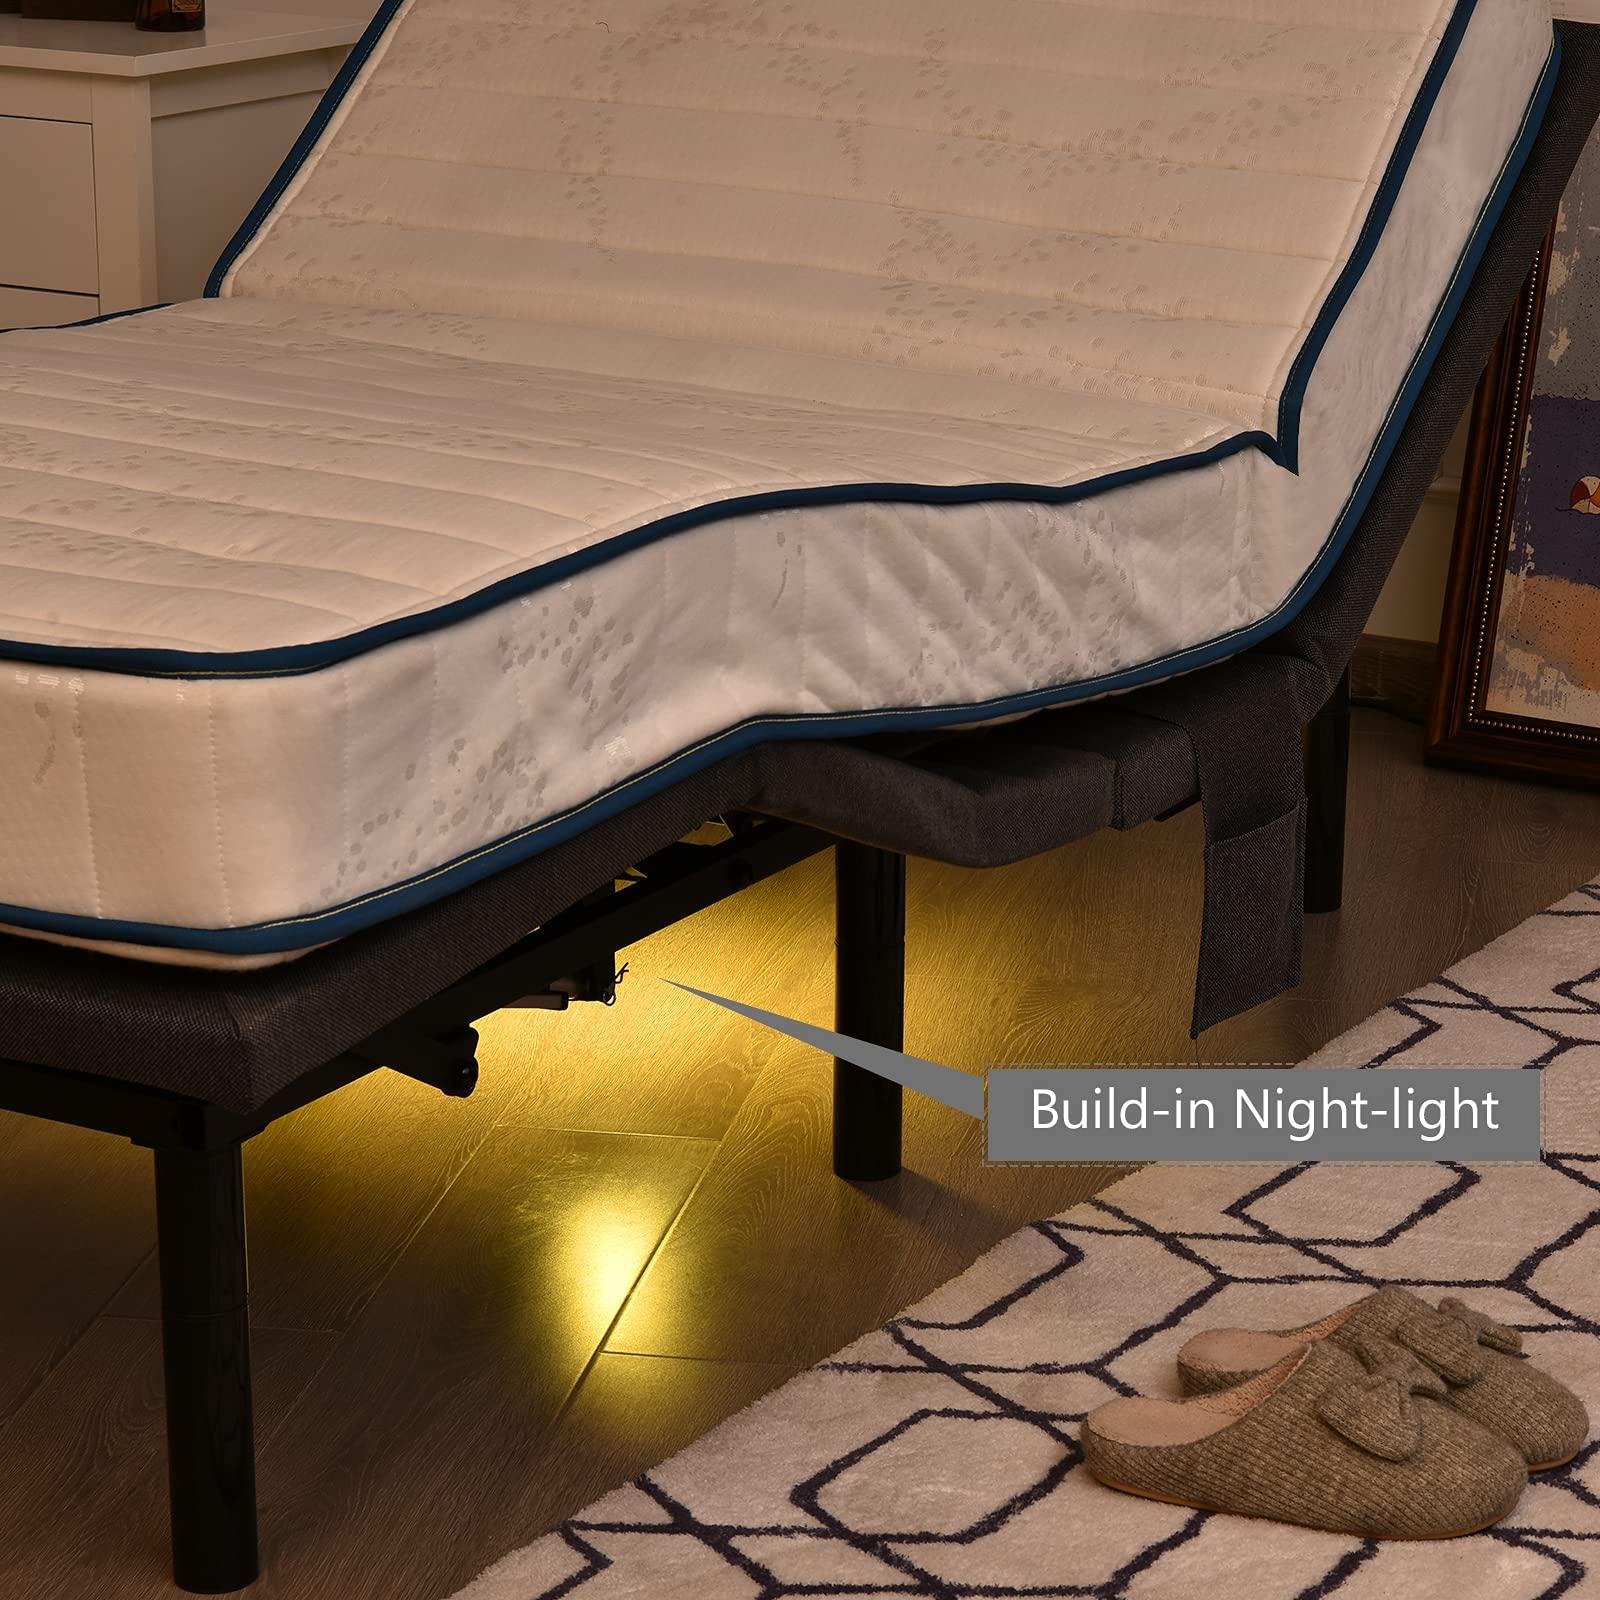 TXL Adjustable Bed Base with 8 Inch Memory Foam, Adjustable Bed w/ Head and Foot Incline